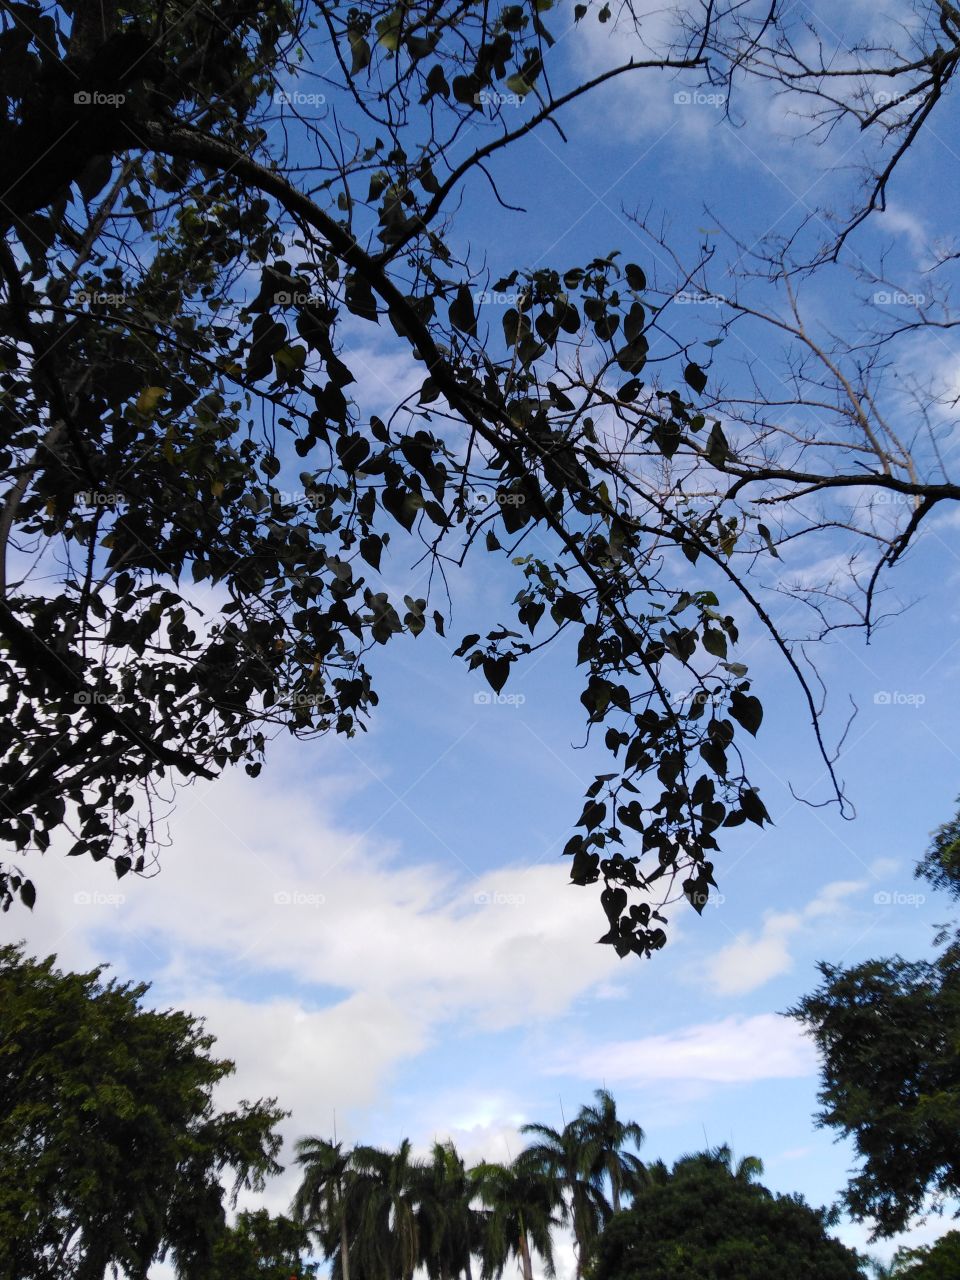 Fragment of Nature, blue skies and white clouds. Weather is fine and beautiful. Sun is up but has a cool crisp wind blowing on my skin, such complimentary schemes that contrast, but work like they are inseparable.